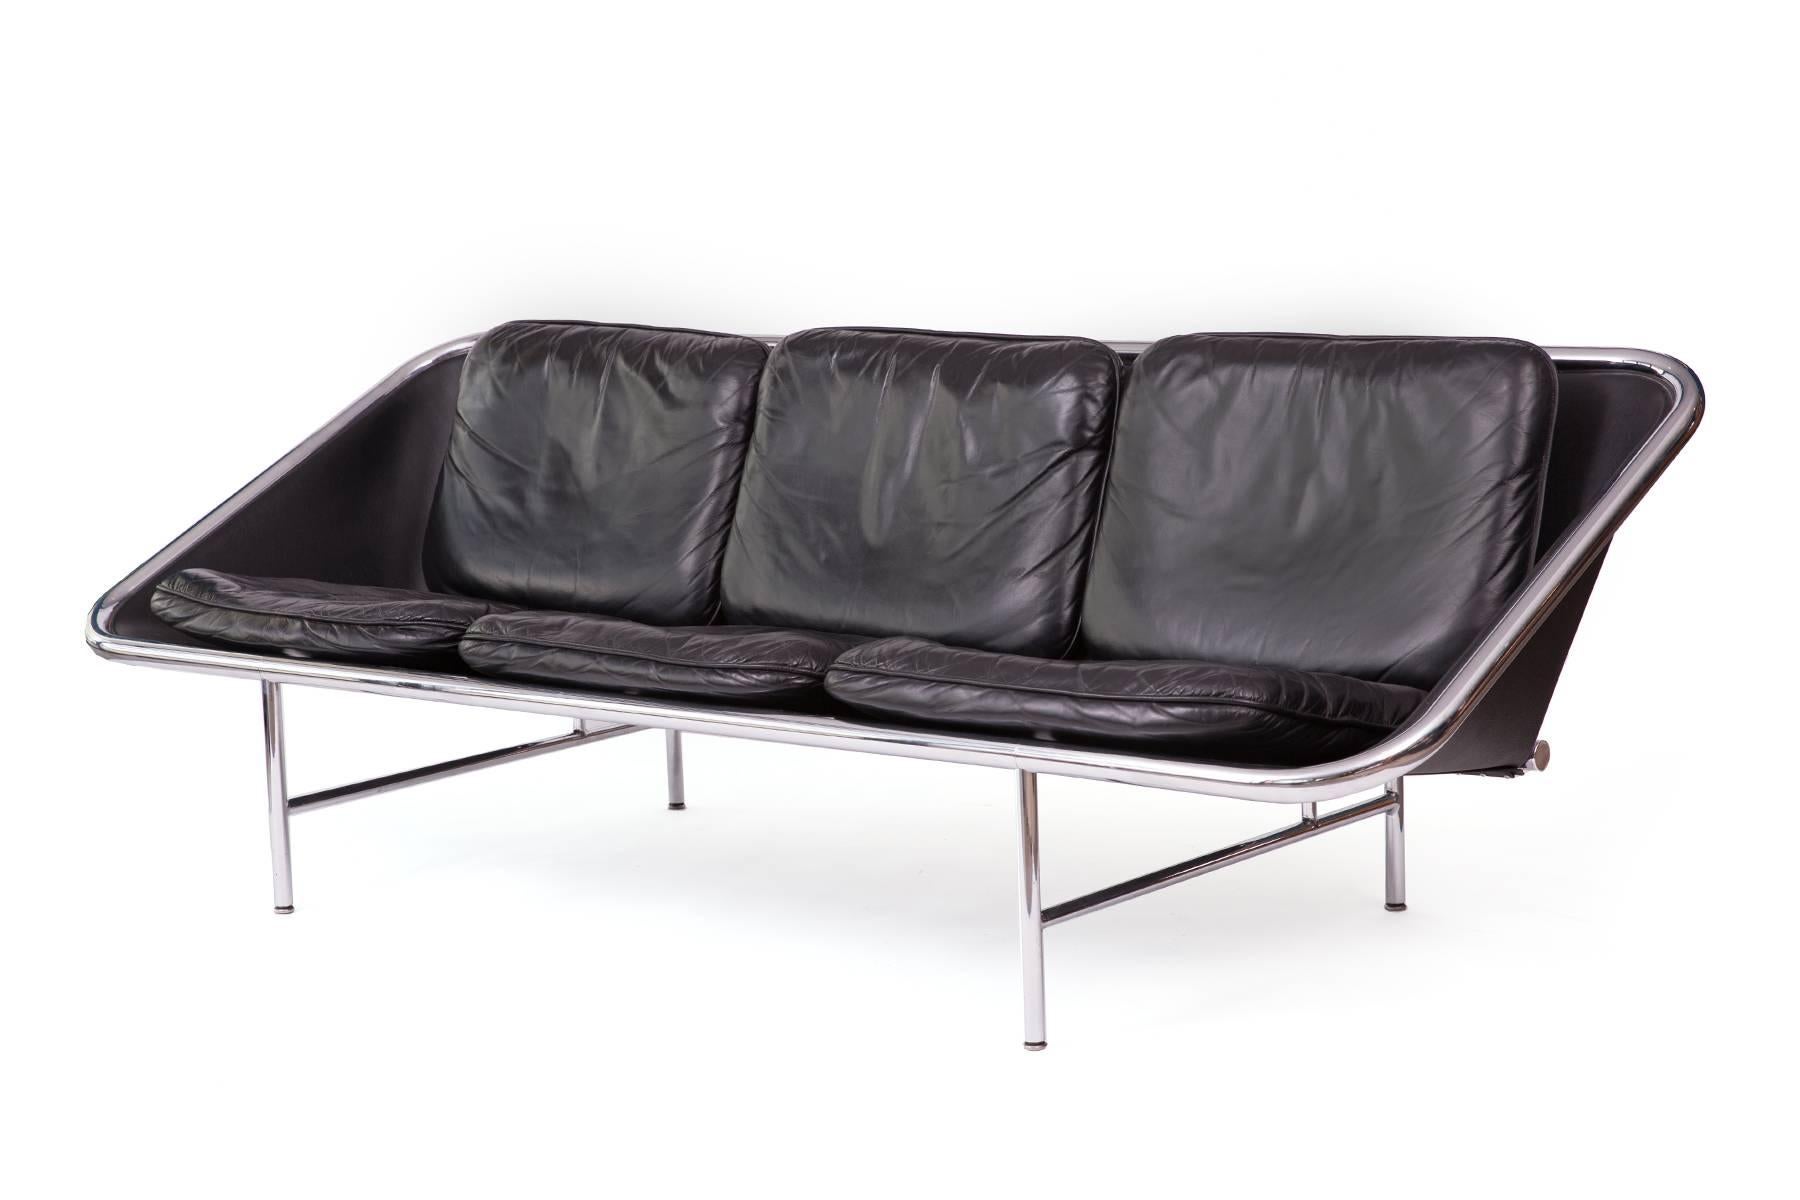 George Nelson for Herman Miller sling sofa, circa late 1960s. This stunning all original example has beautifully patinated black leather upholstery and polished steel frame and legs.